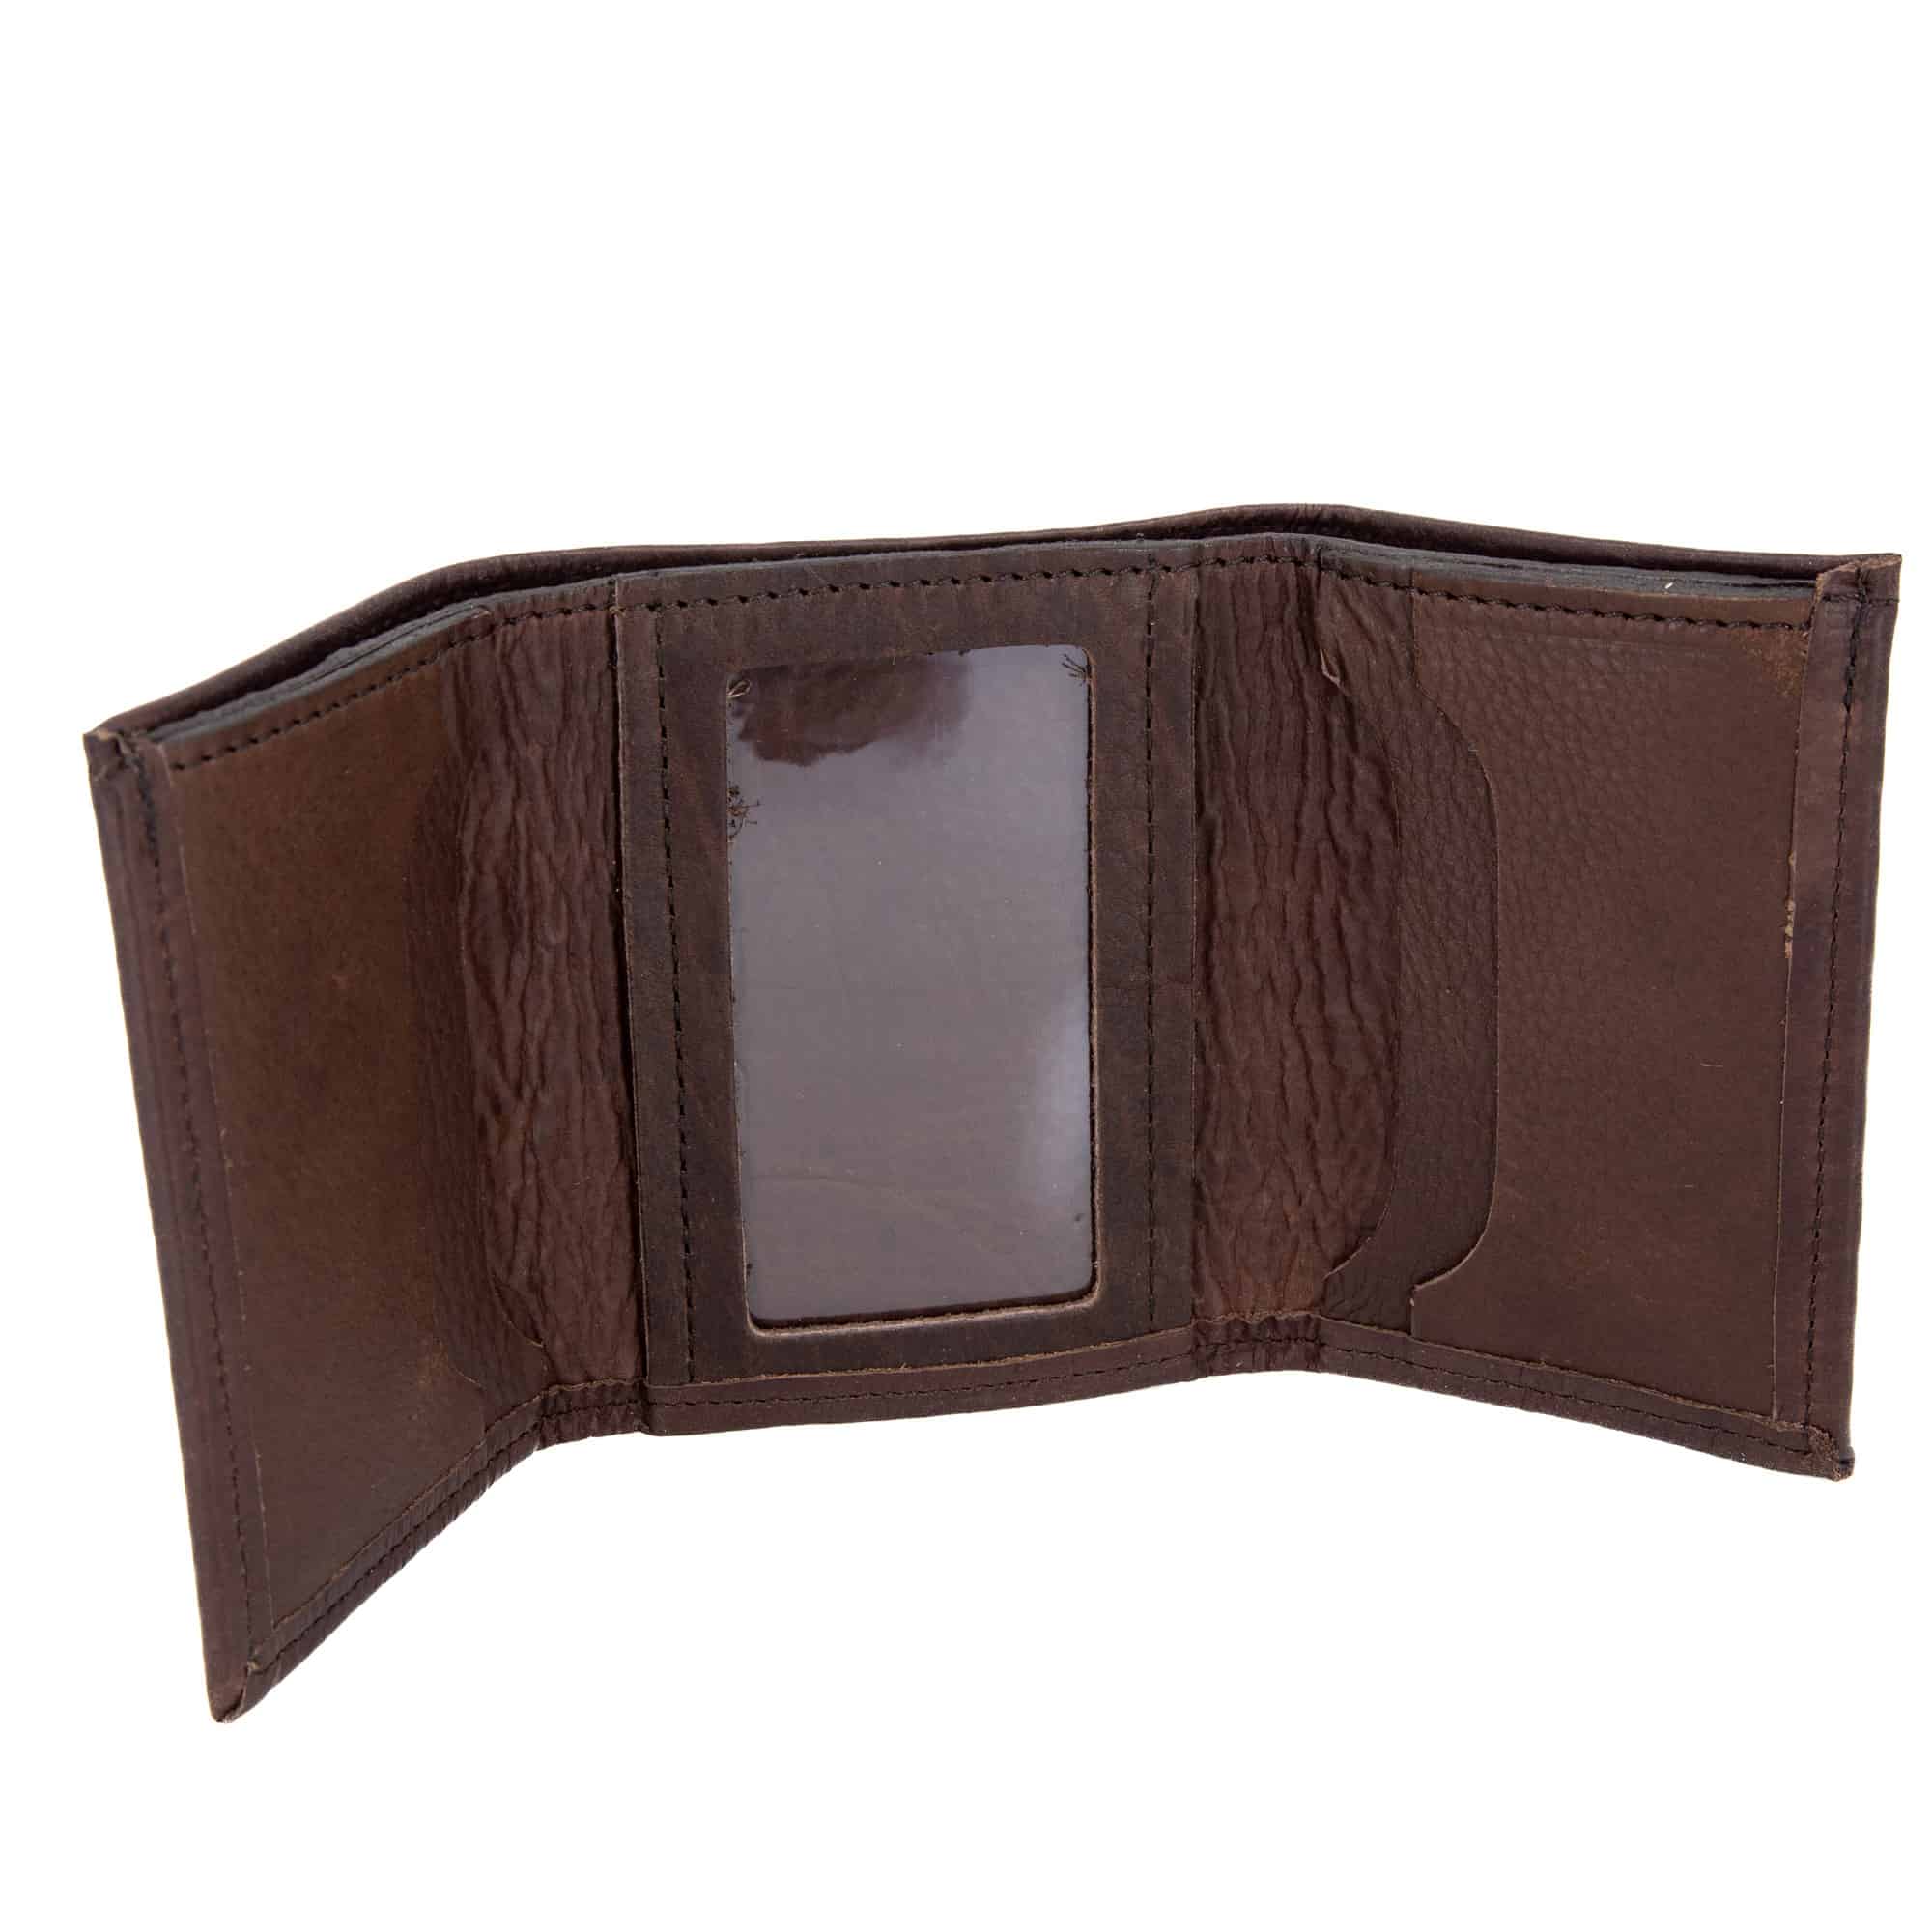 TRIFOLD MENS WALLET Men's Leather Trifold Wallet Handmade 